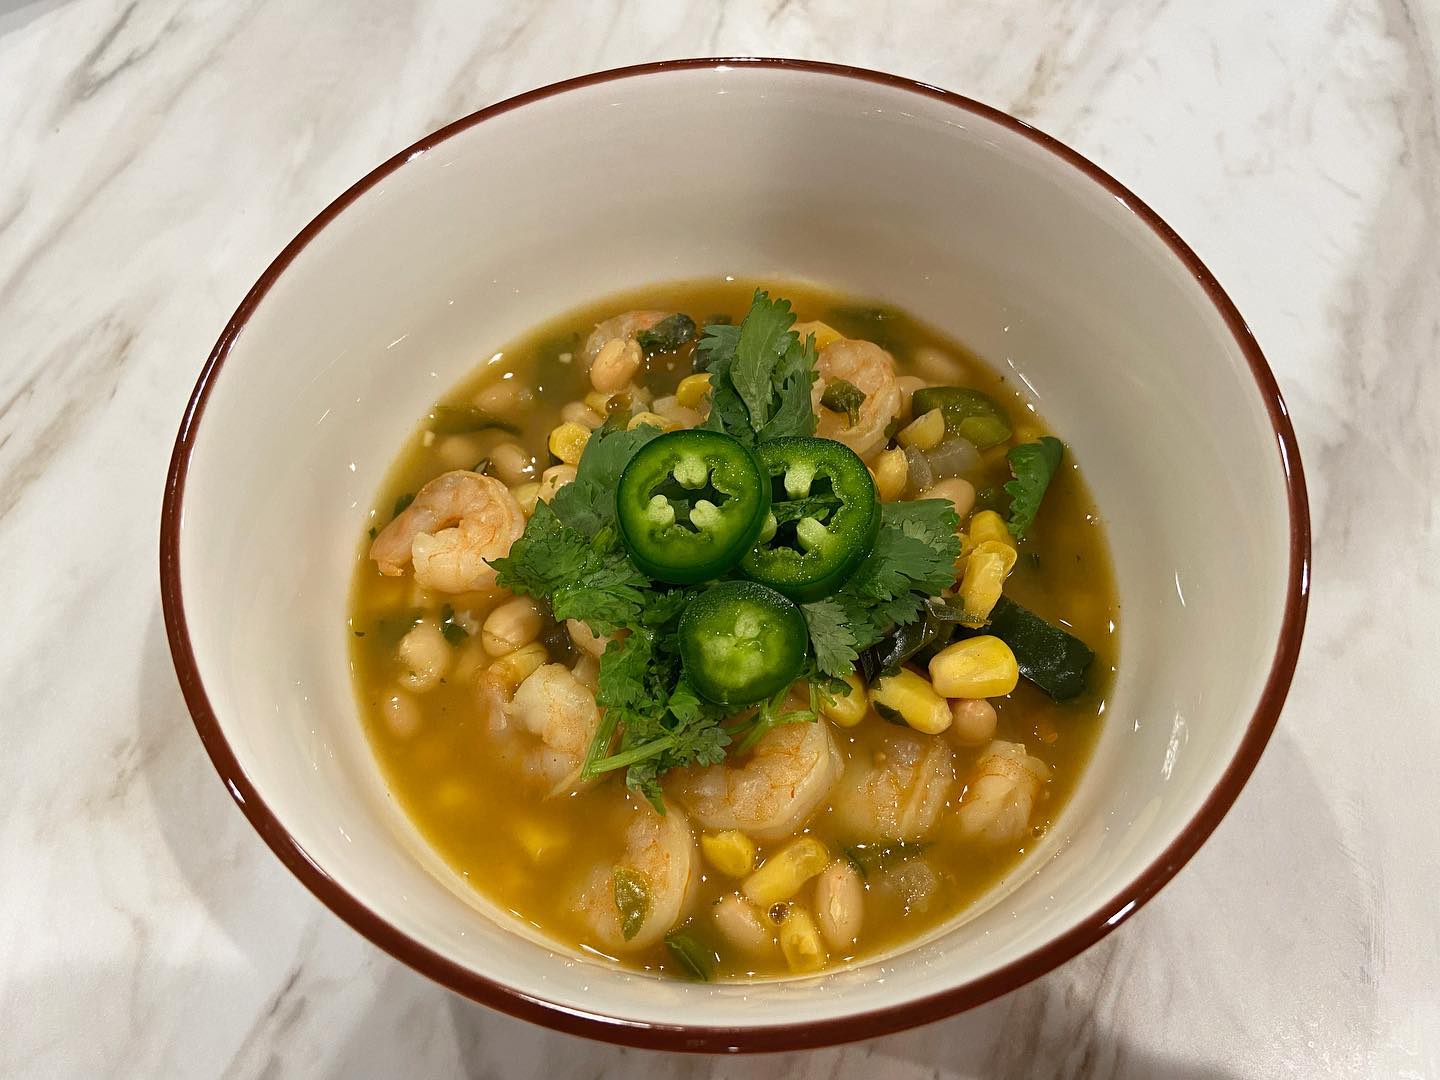 I’ve not been posting for a couple of weeks, but that doesn’t mean I’m not cooking up new recipes to share! ❤️📝Y’all, I made this Shrimp and Poblano Chili for dinner tonight. It’s healthy and super delicious! 🌶🍤🥣I will be sharing the recipe very soon on my YouTube channel! Link to my food channel is in my bio!  #whatsfordinner #whatsforsupper #foodporn #eatwithyoureyes #spicy #soupseason #youtubecooking #youtubecookingchannel #youtuber #delicious #texasfoodie #texasblogger